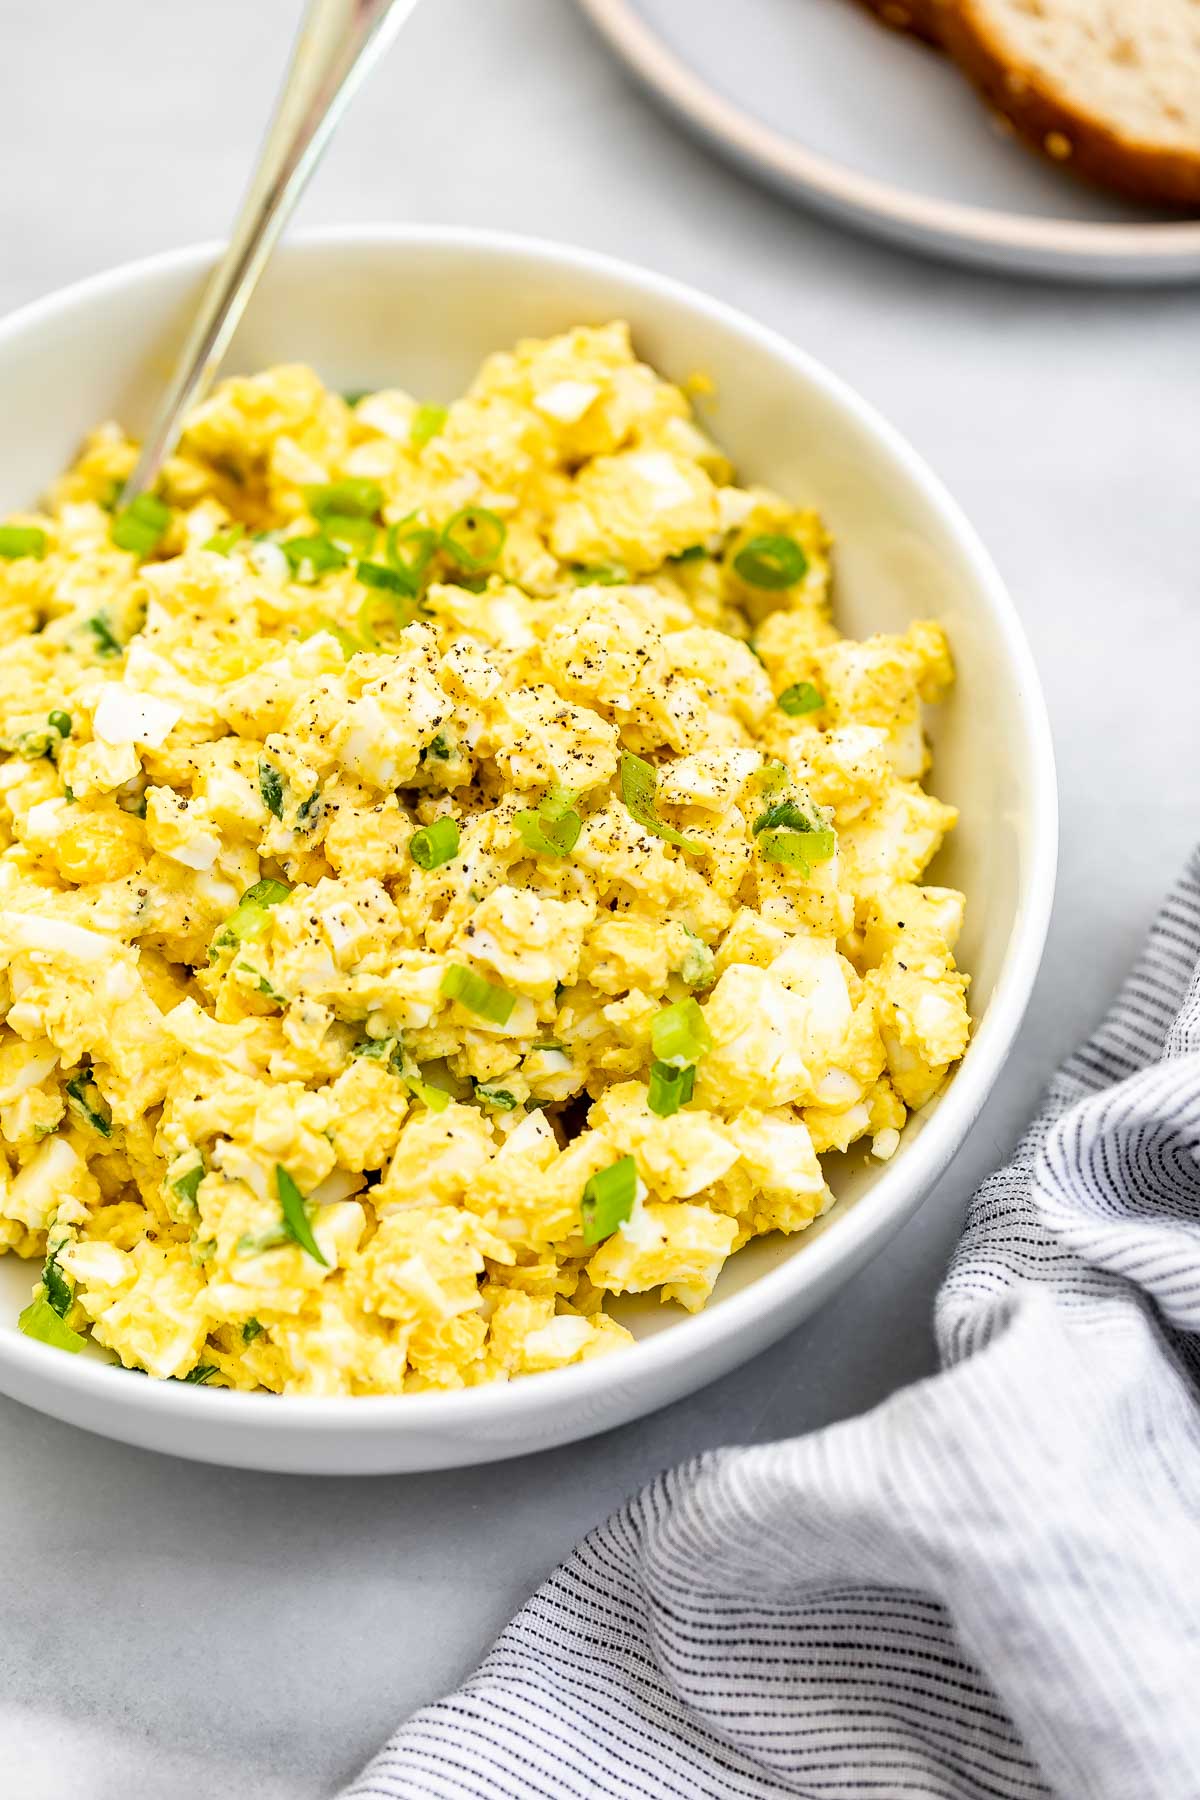 Up close image of the egg salad to show texture. 